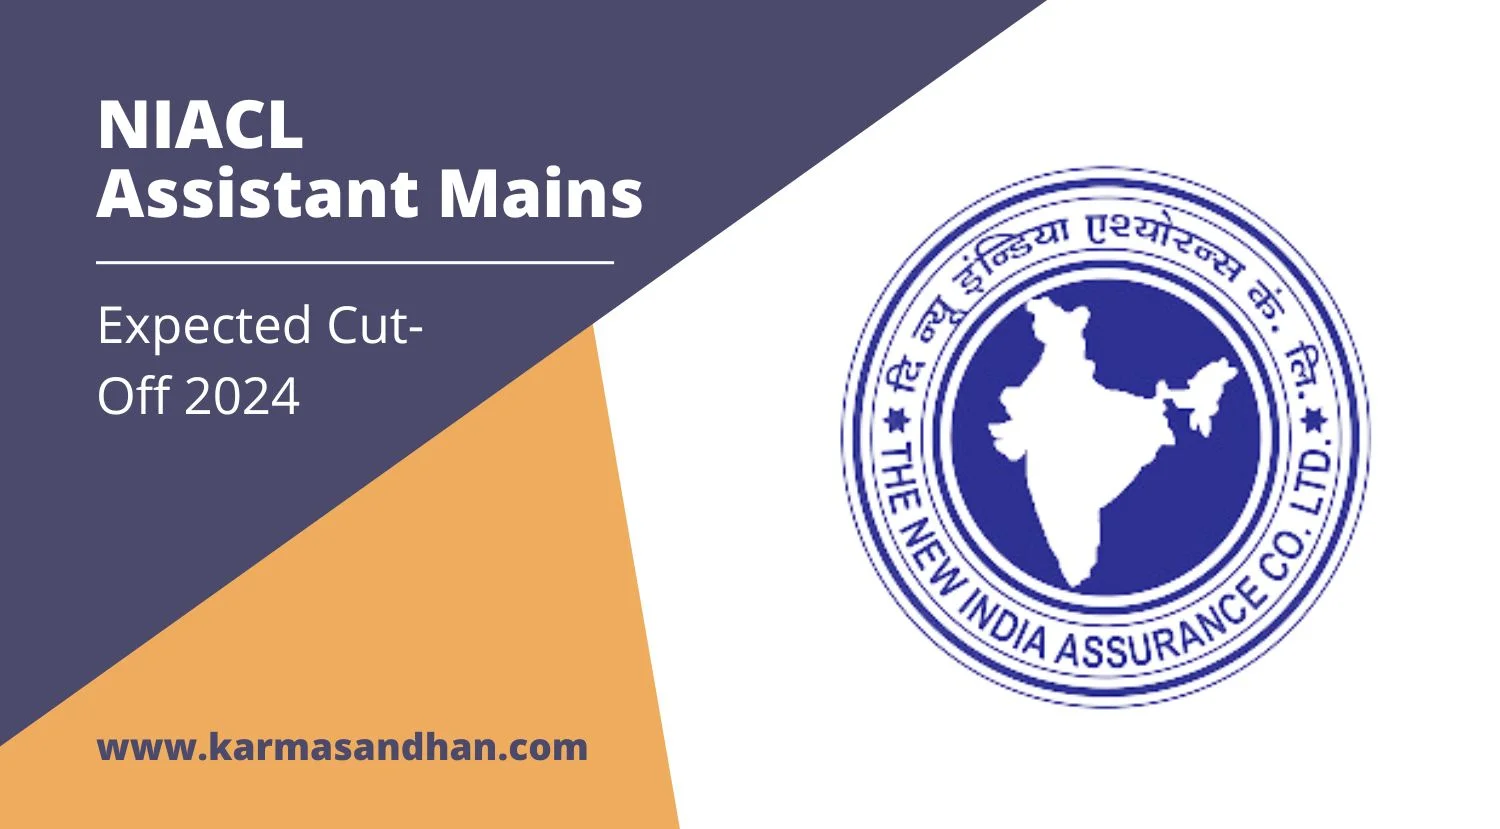 NIACL Assistant Mains Expected Cut-Off 2024